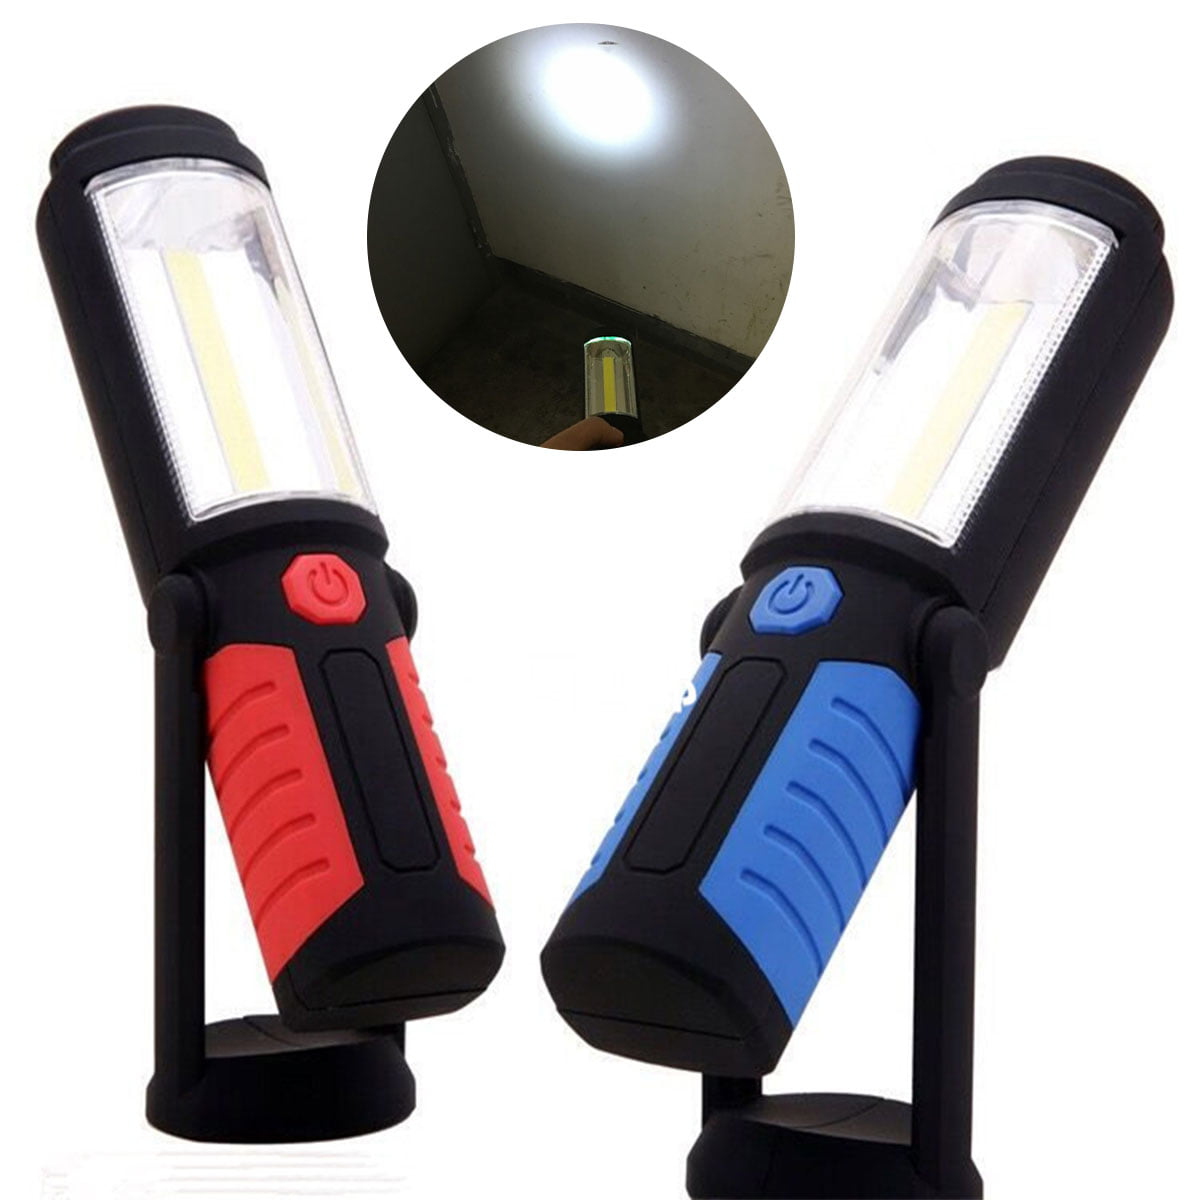 Outdoor COB LED Magnetic Work Light USB Rechargeable Inspection Lamp Flahlights 